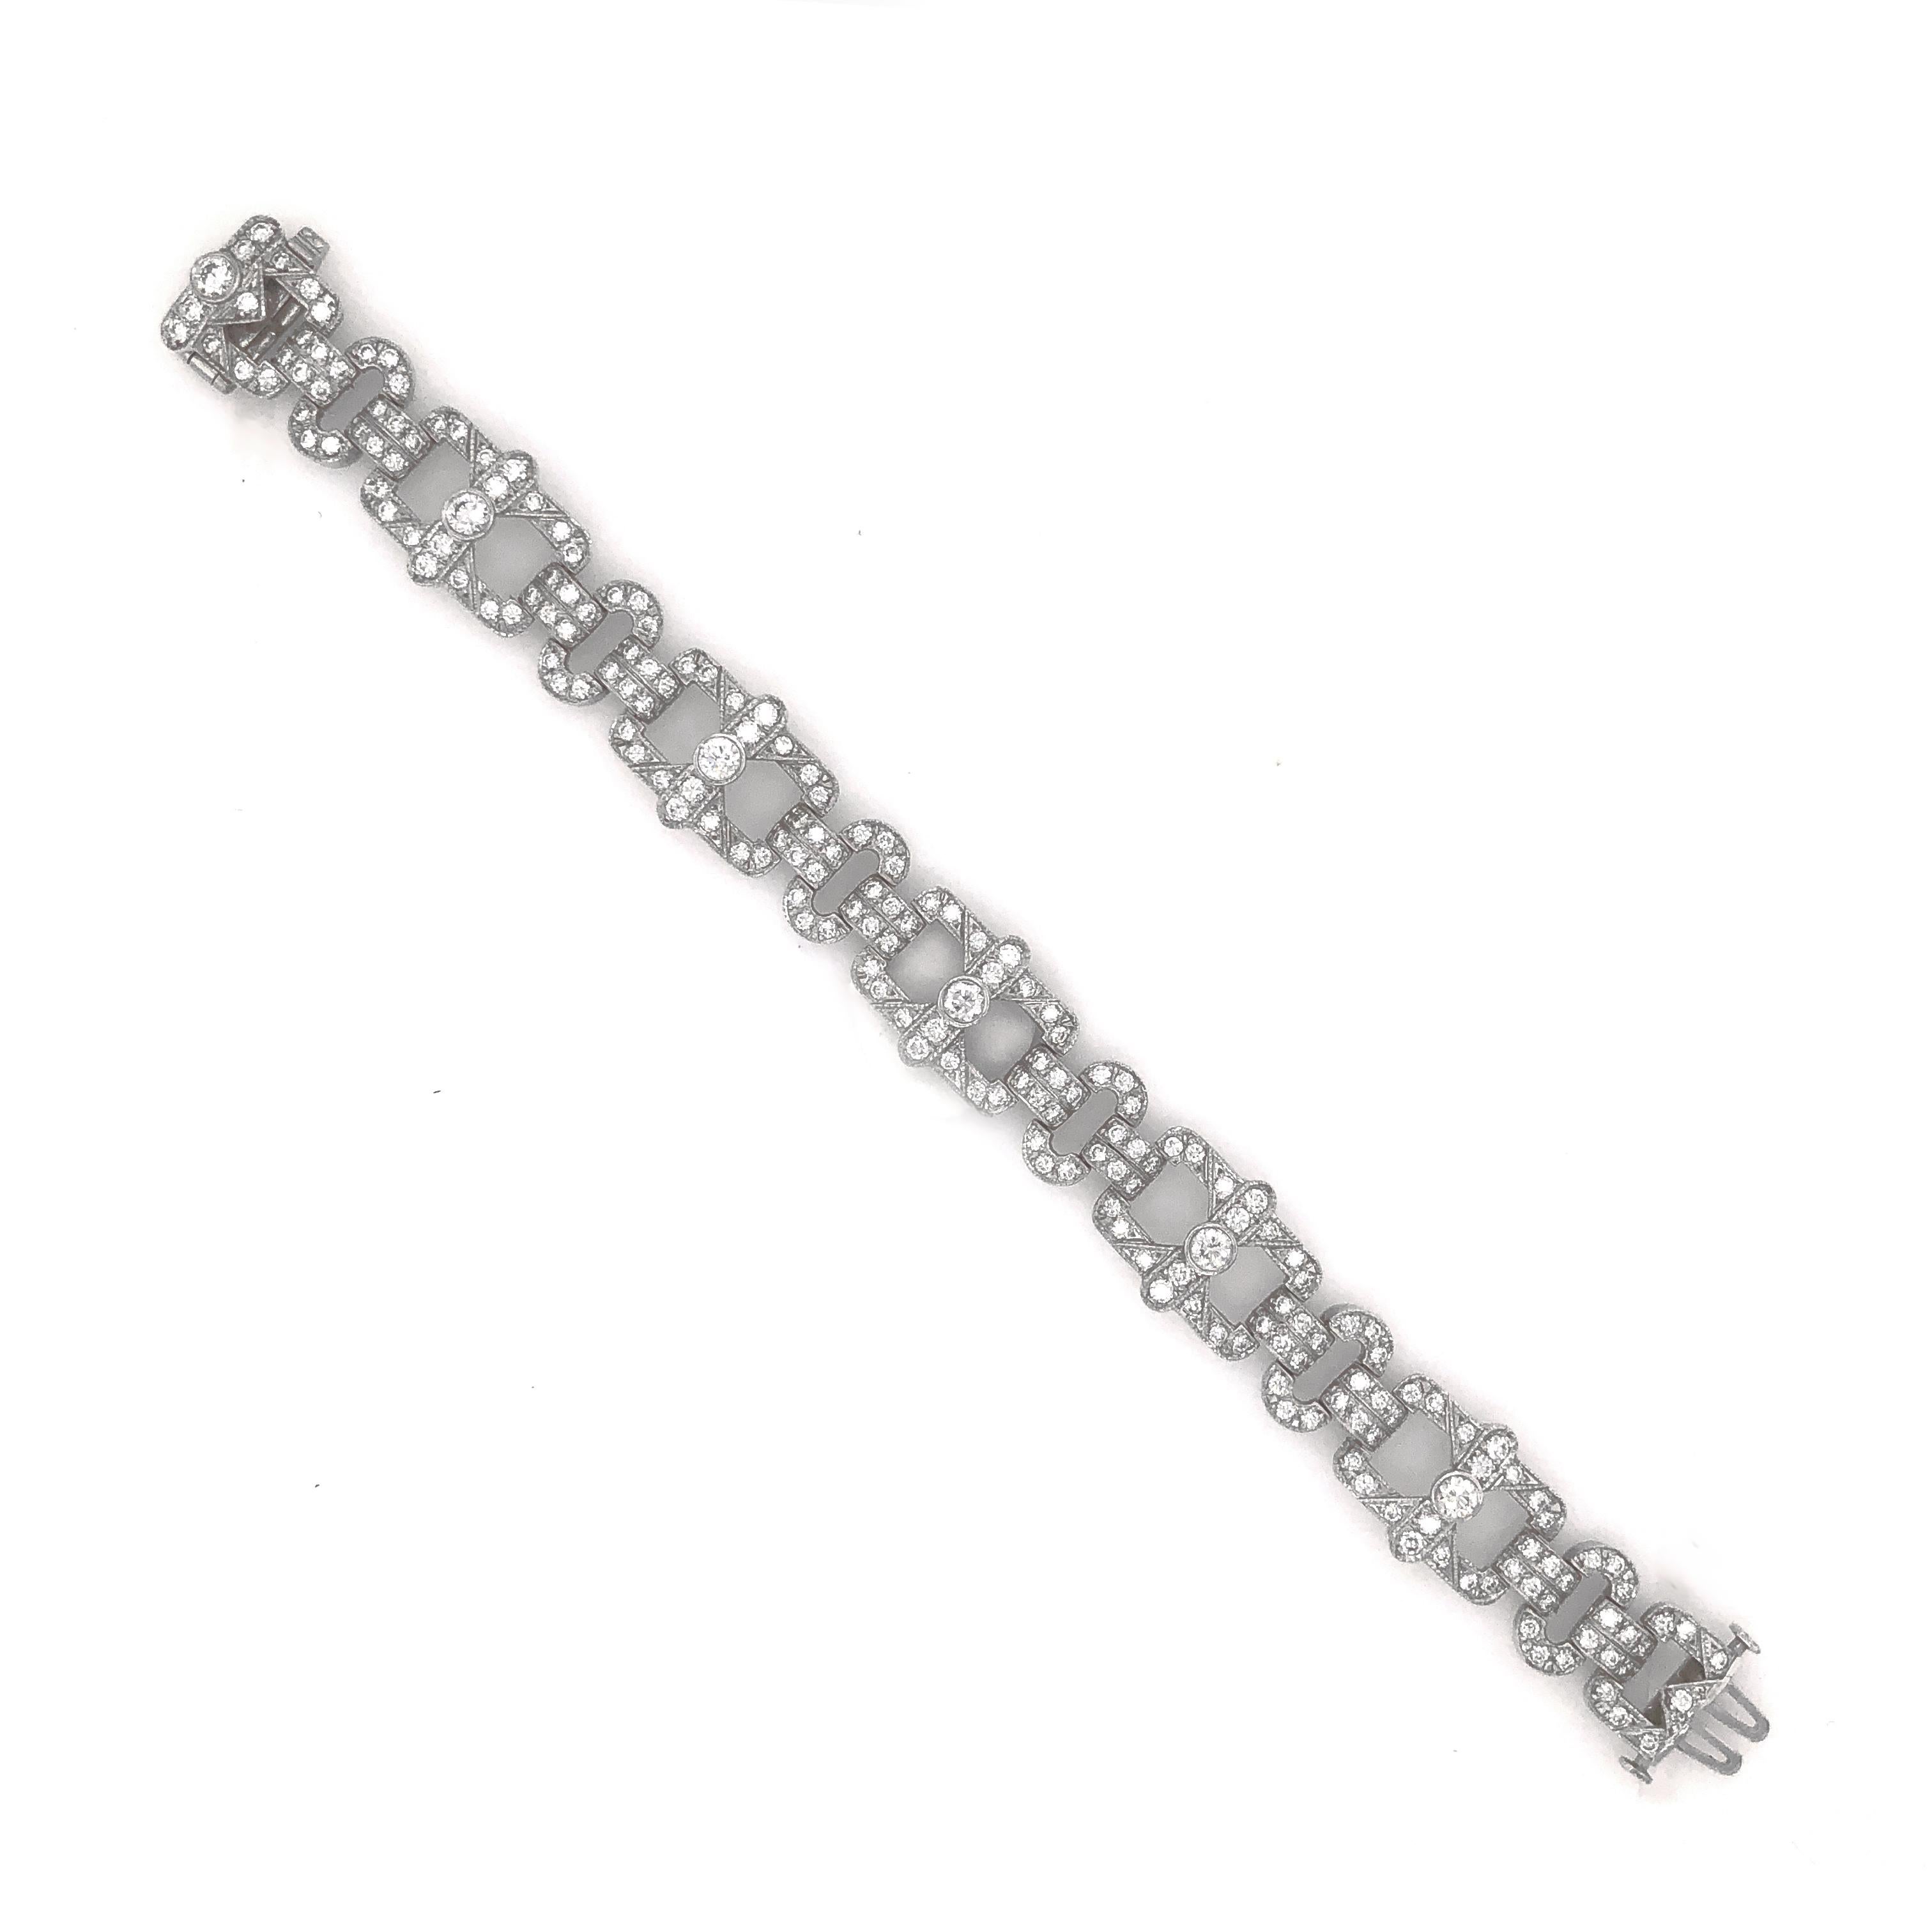 This is a slim vintage and Art Deco inspired diamond platinum bracelet.  It is adorned with white round cut diamonds in 6.18 carat total  Diamonds are all natural in G-H Color Clarity VS.   Platinum 950 bracelet. 